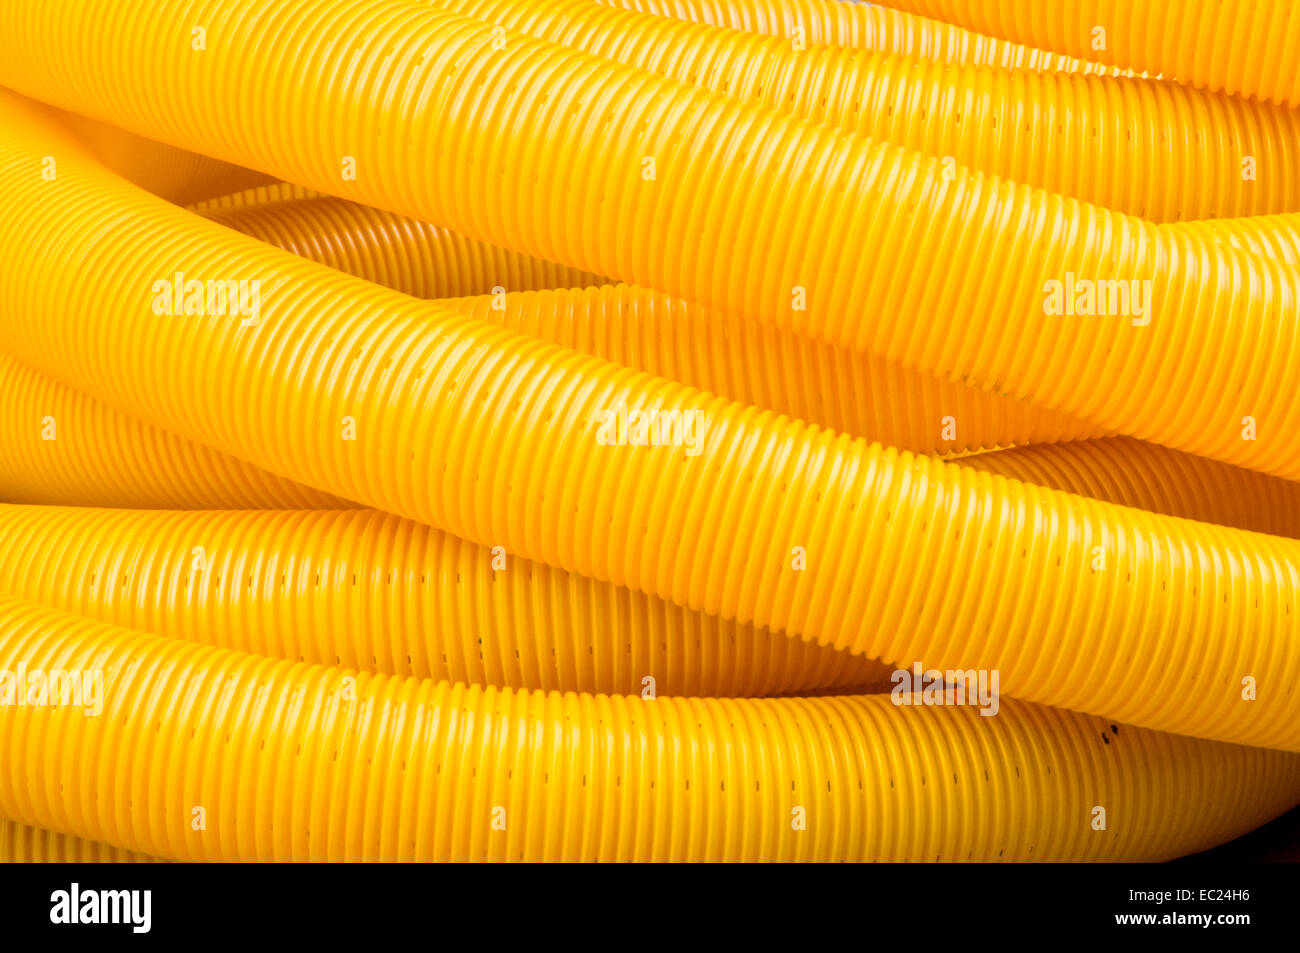 Download Yellow Plastic Industrial Construction Tubes Stock Photo Alamy Yellowimages Mockups